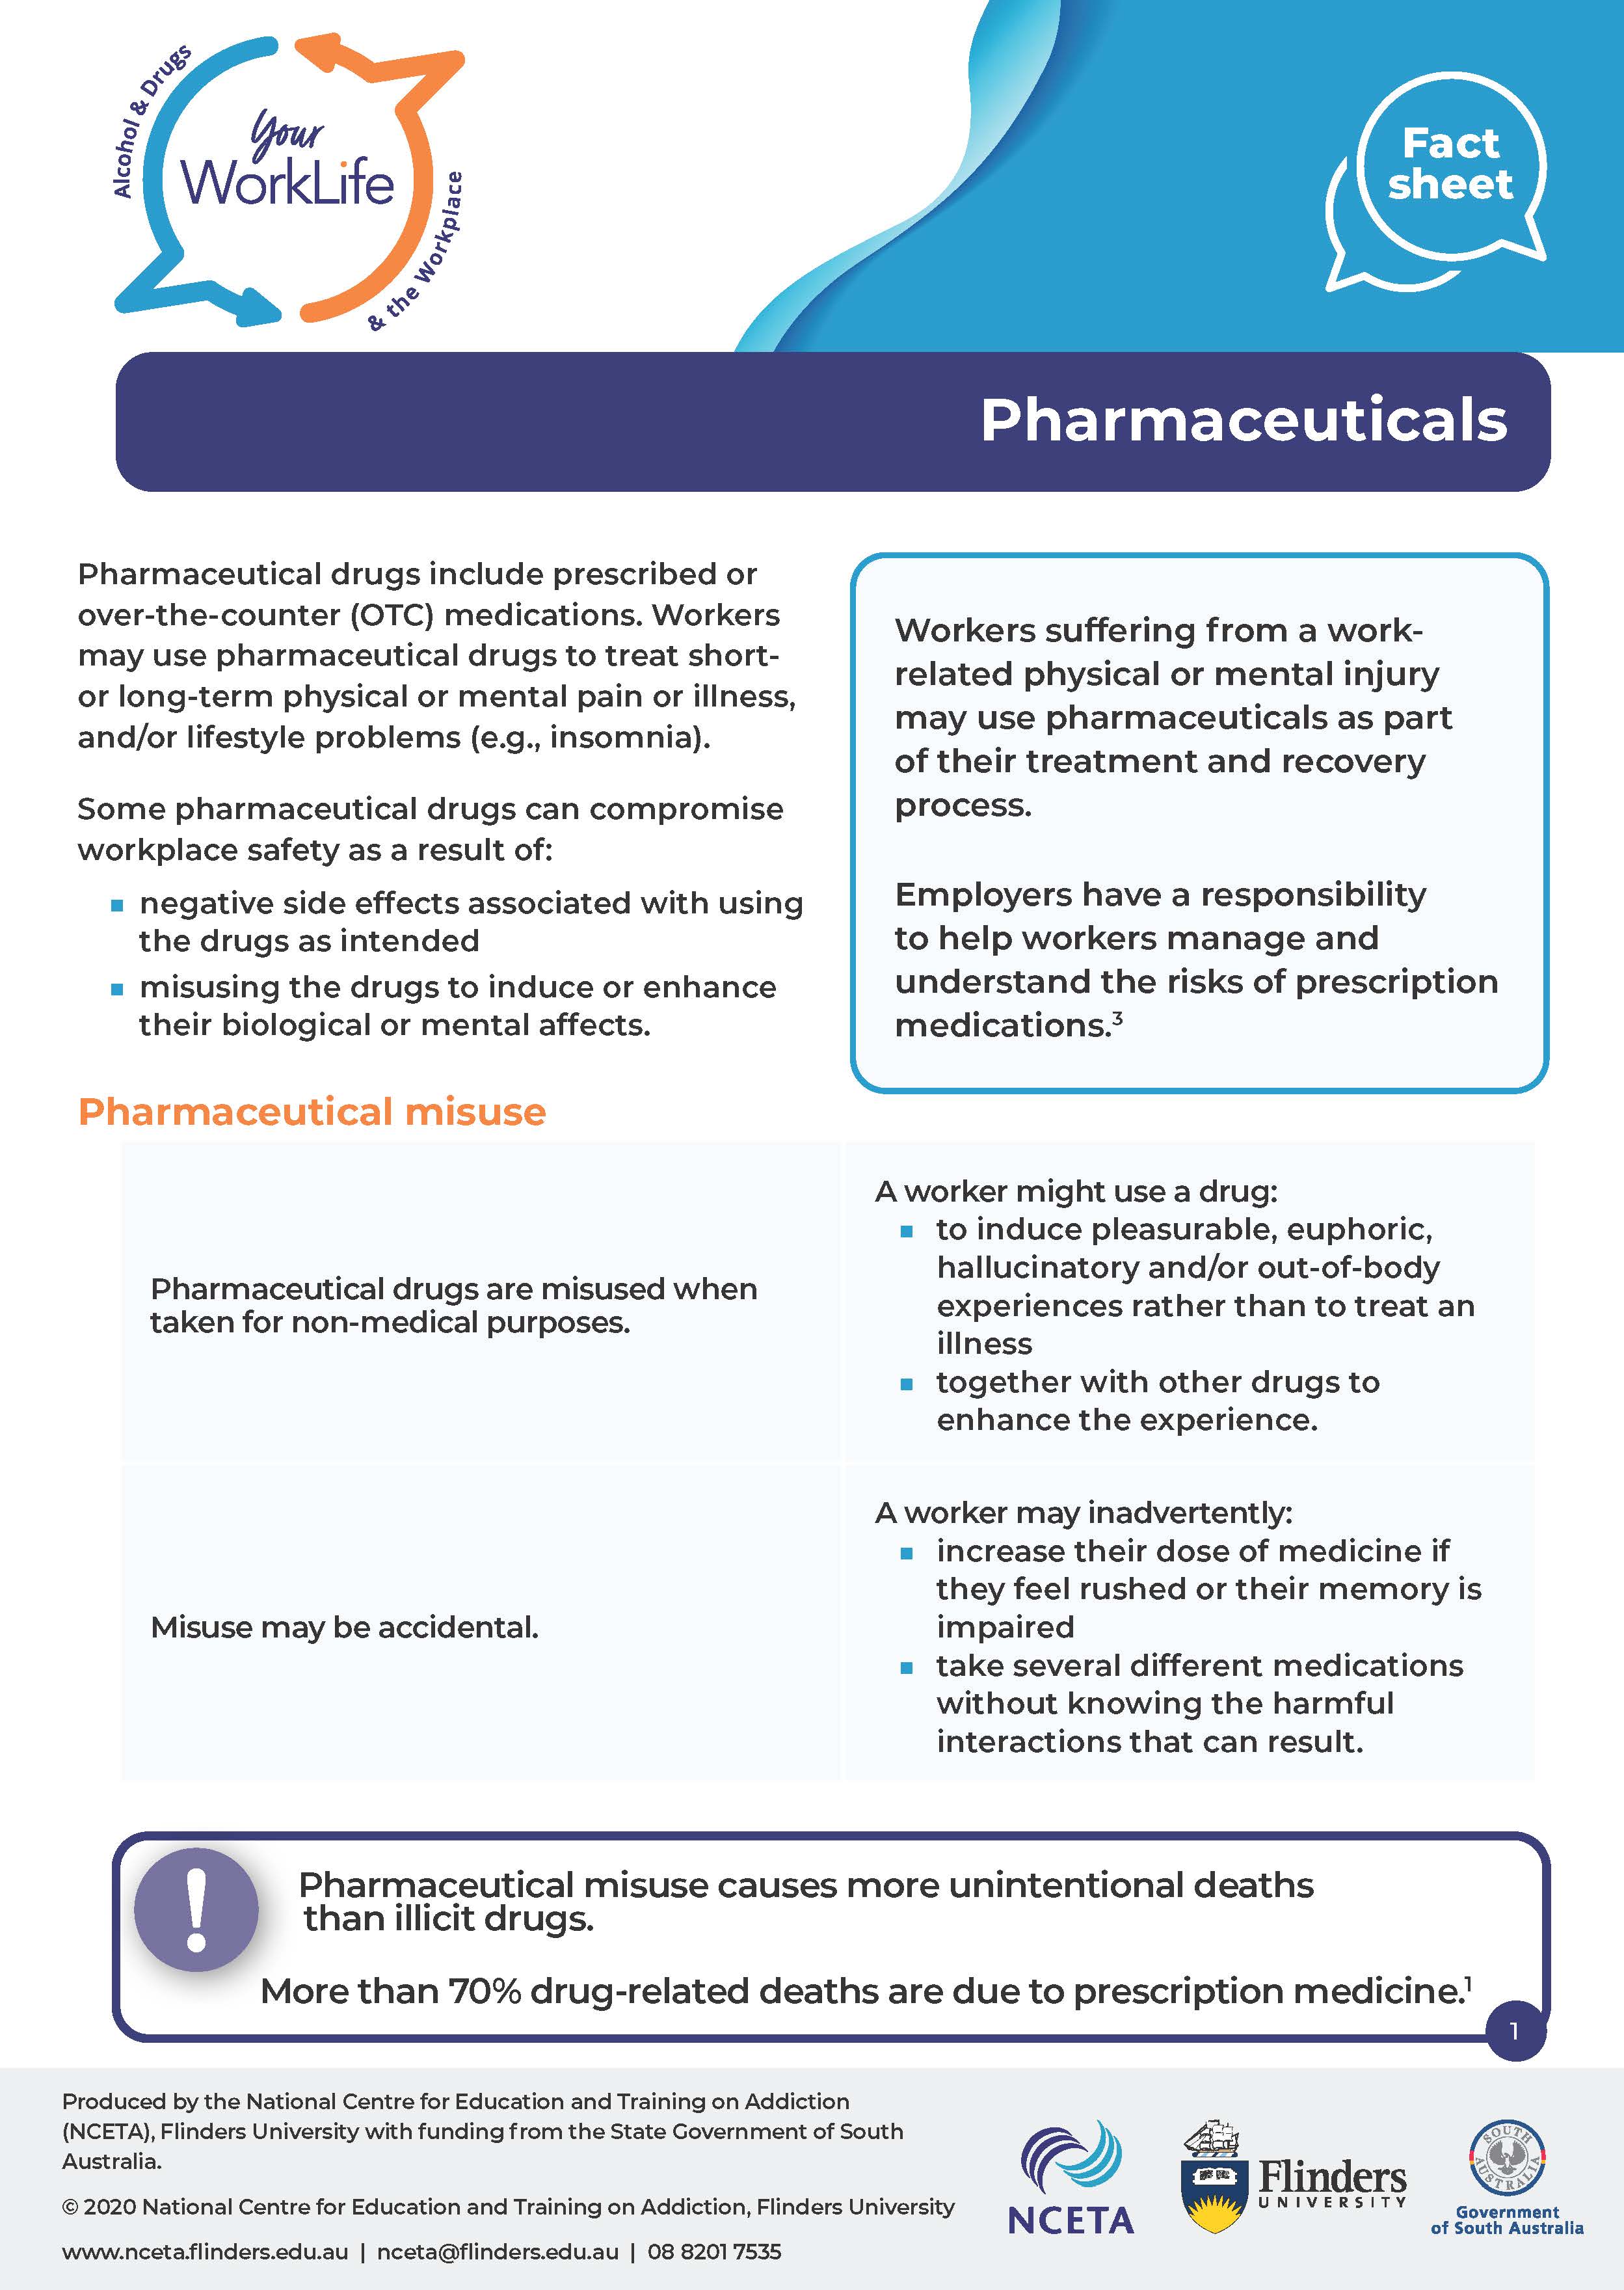 Front page fact-sheet-pharmaceuticals 20200505.jpg